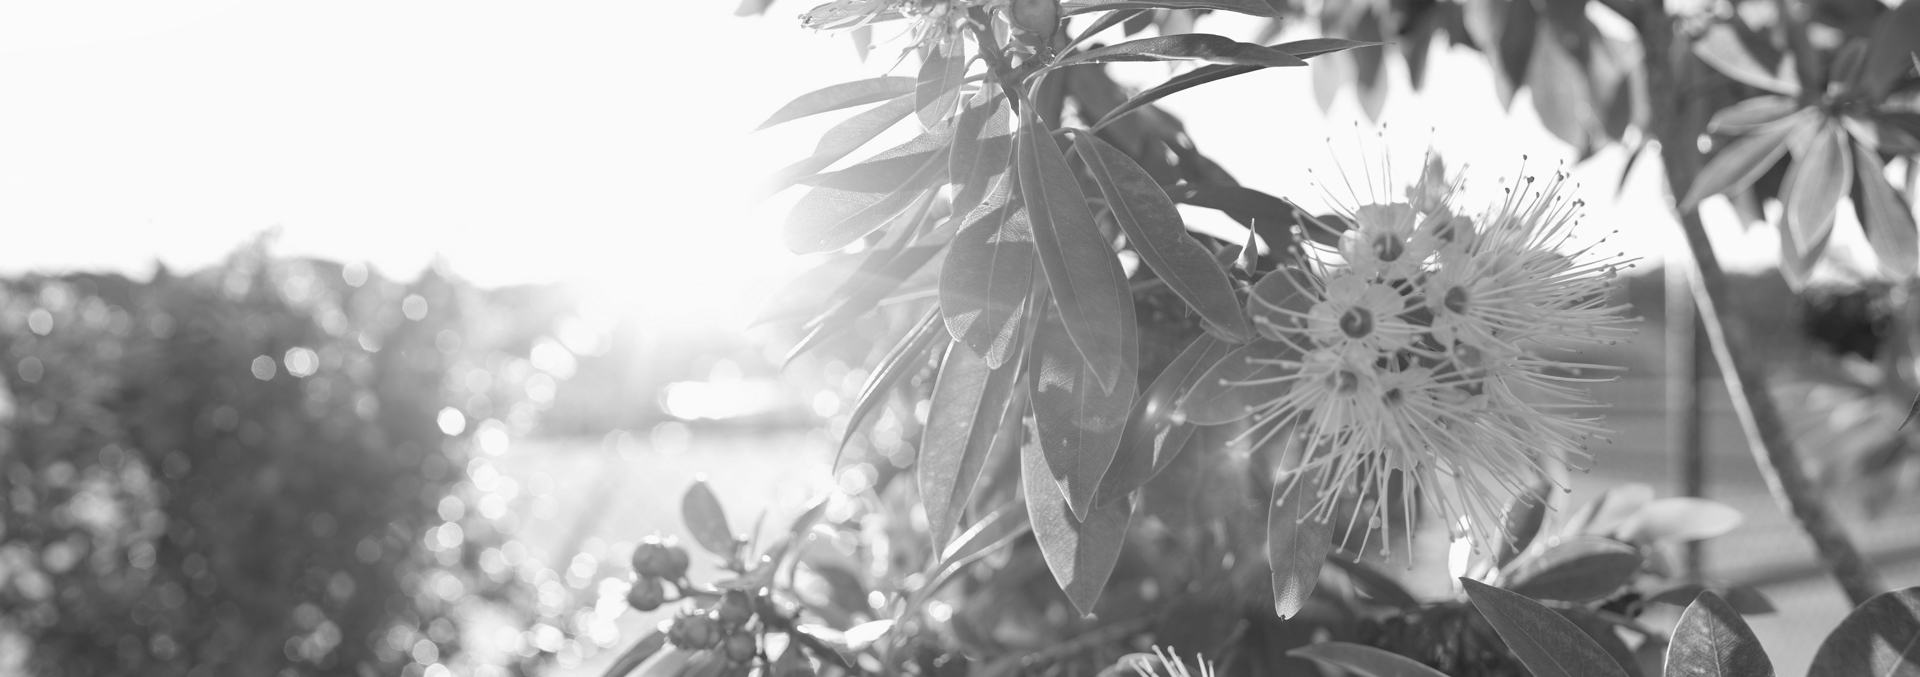 Black and white close up photo of plant with flower 